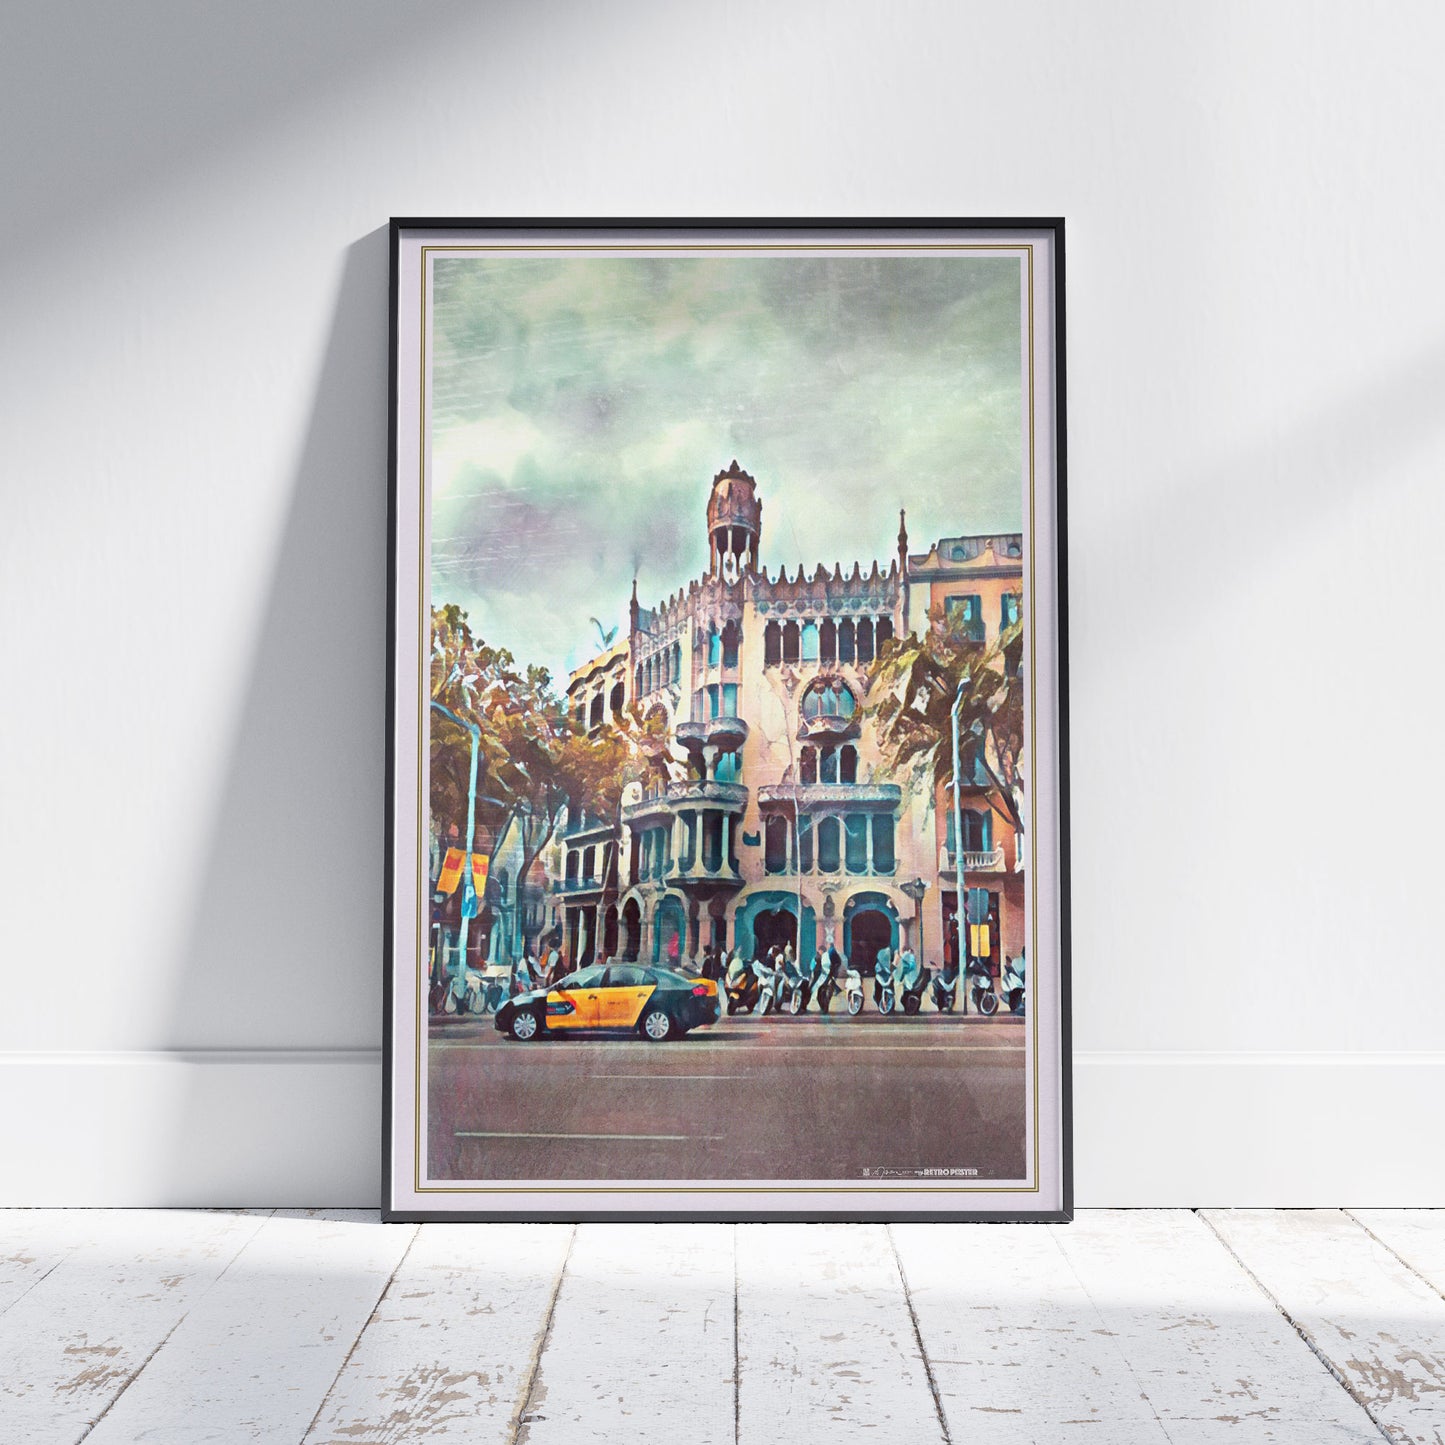 Limited Edition Casa Lleó Morera Barcelona Poster by Alecse, No titles version, Framed on White Wooden Floor